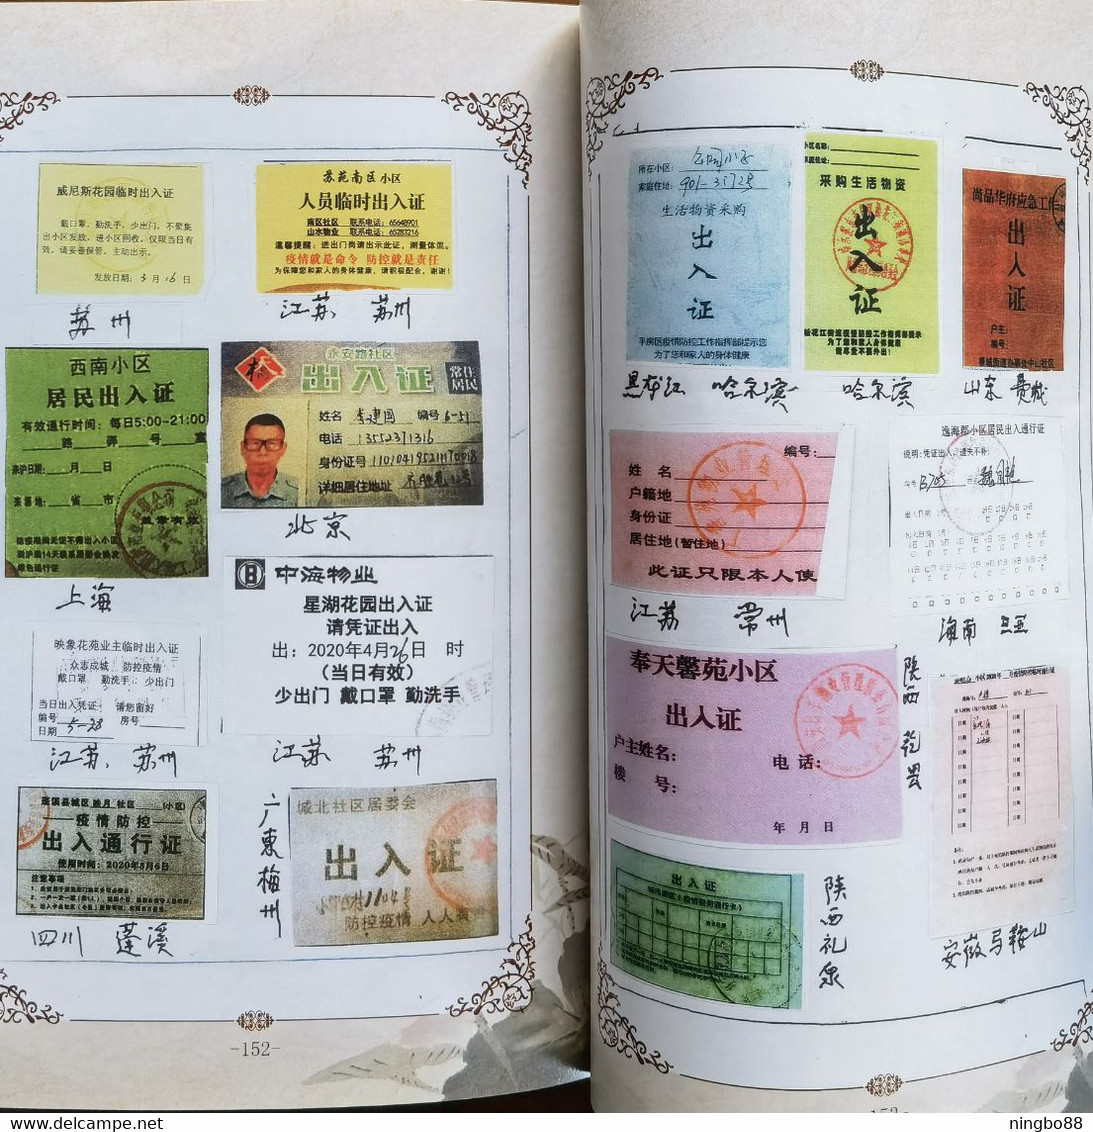 China 2020 fighting COVID-19 pandemic postmarks & covers philatelic collection special catalogue book 164 Pages